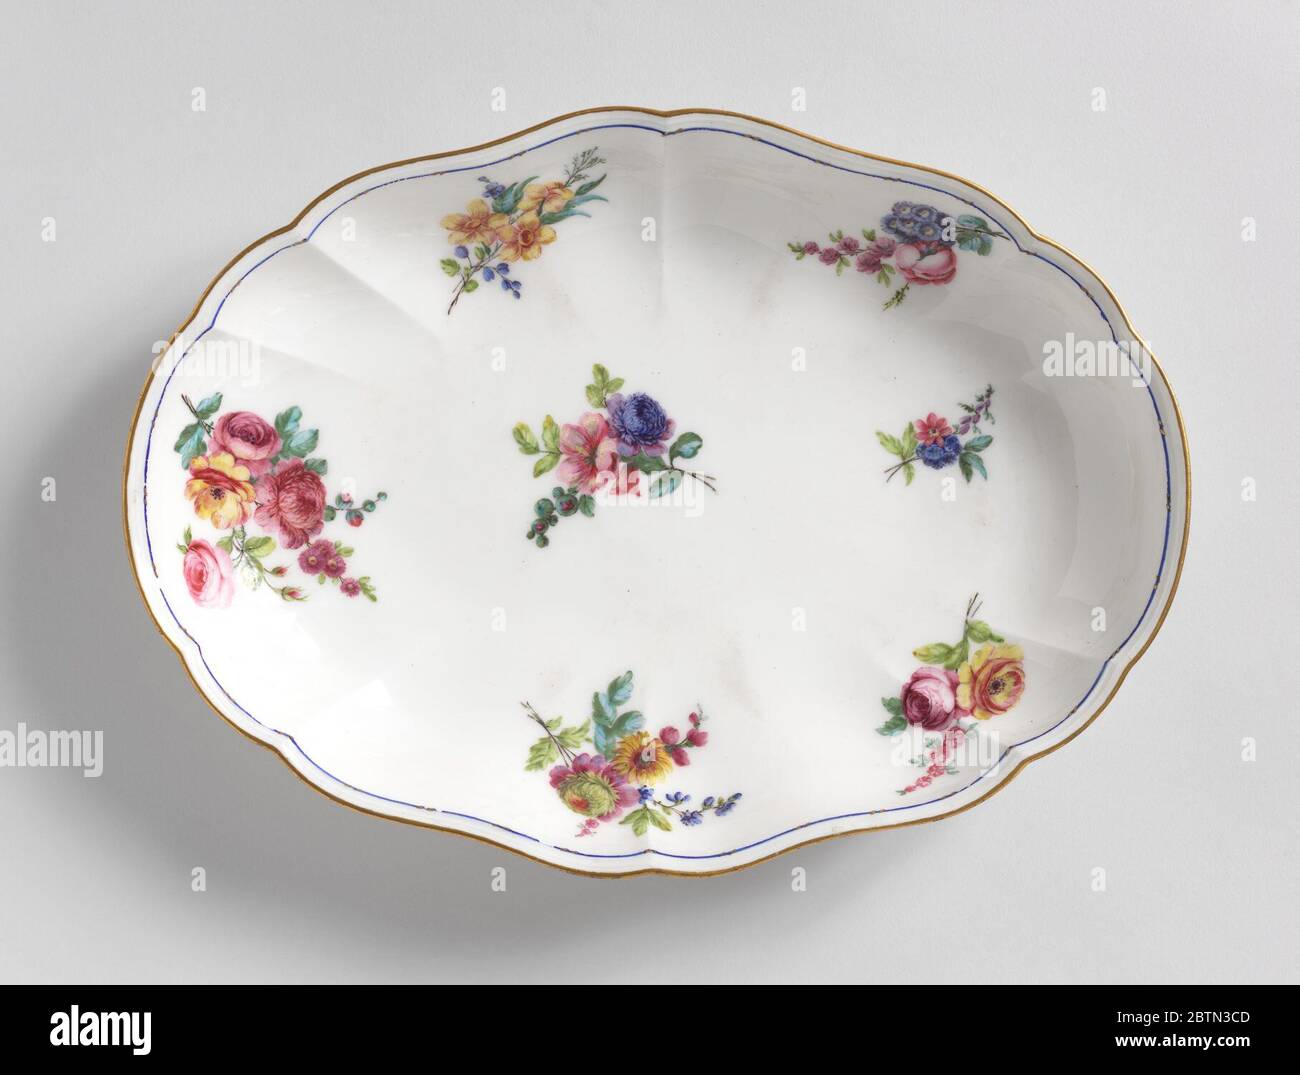 Oval Dishes with Floral Sprays. Research in ProgressOval slightly scalloped sides. Decorated with floral sprays. Slim blue band on inside edge. Top edge gilded. Stock Photo